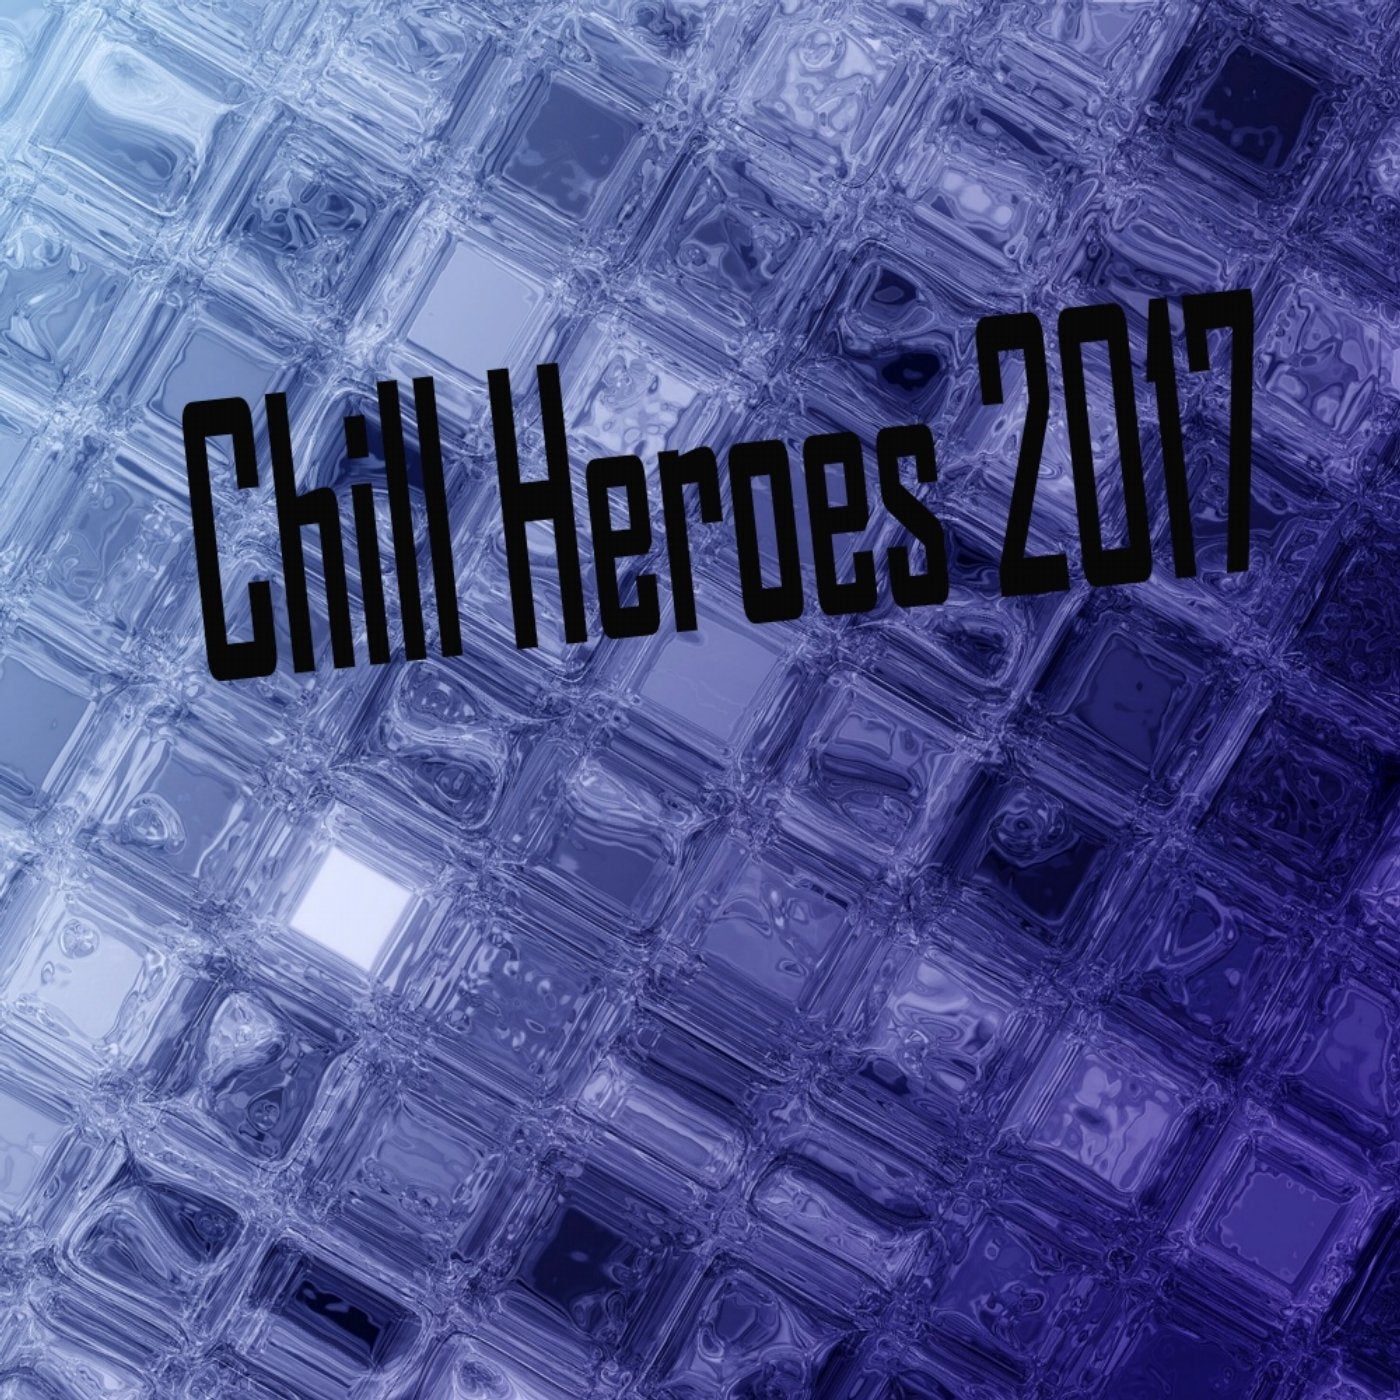 Chill Heroes 2017